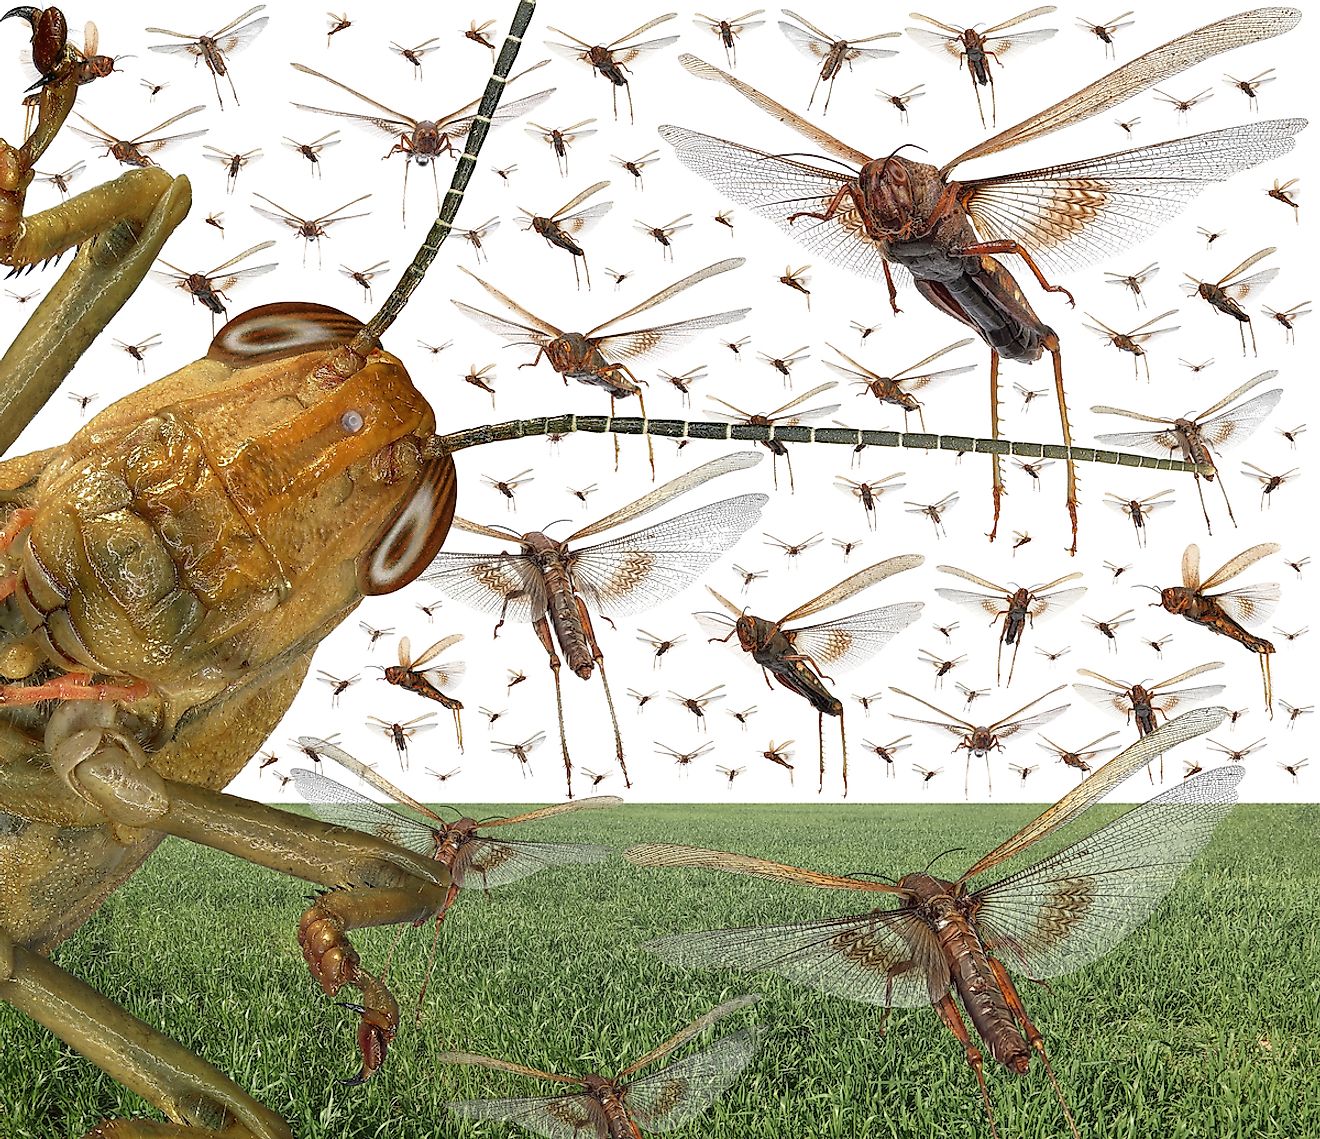 Migratory locust swarm above the cereal green field. Image credit: Protasov AN/Shutterstock.com